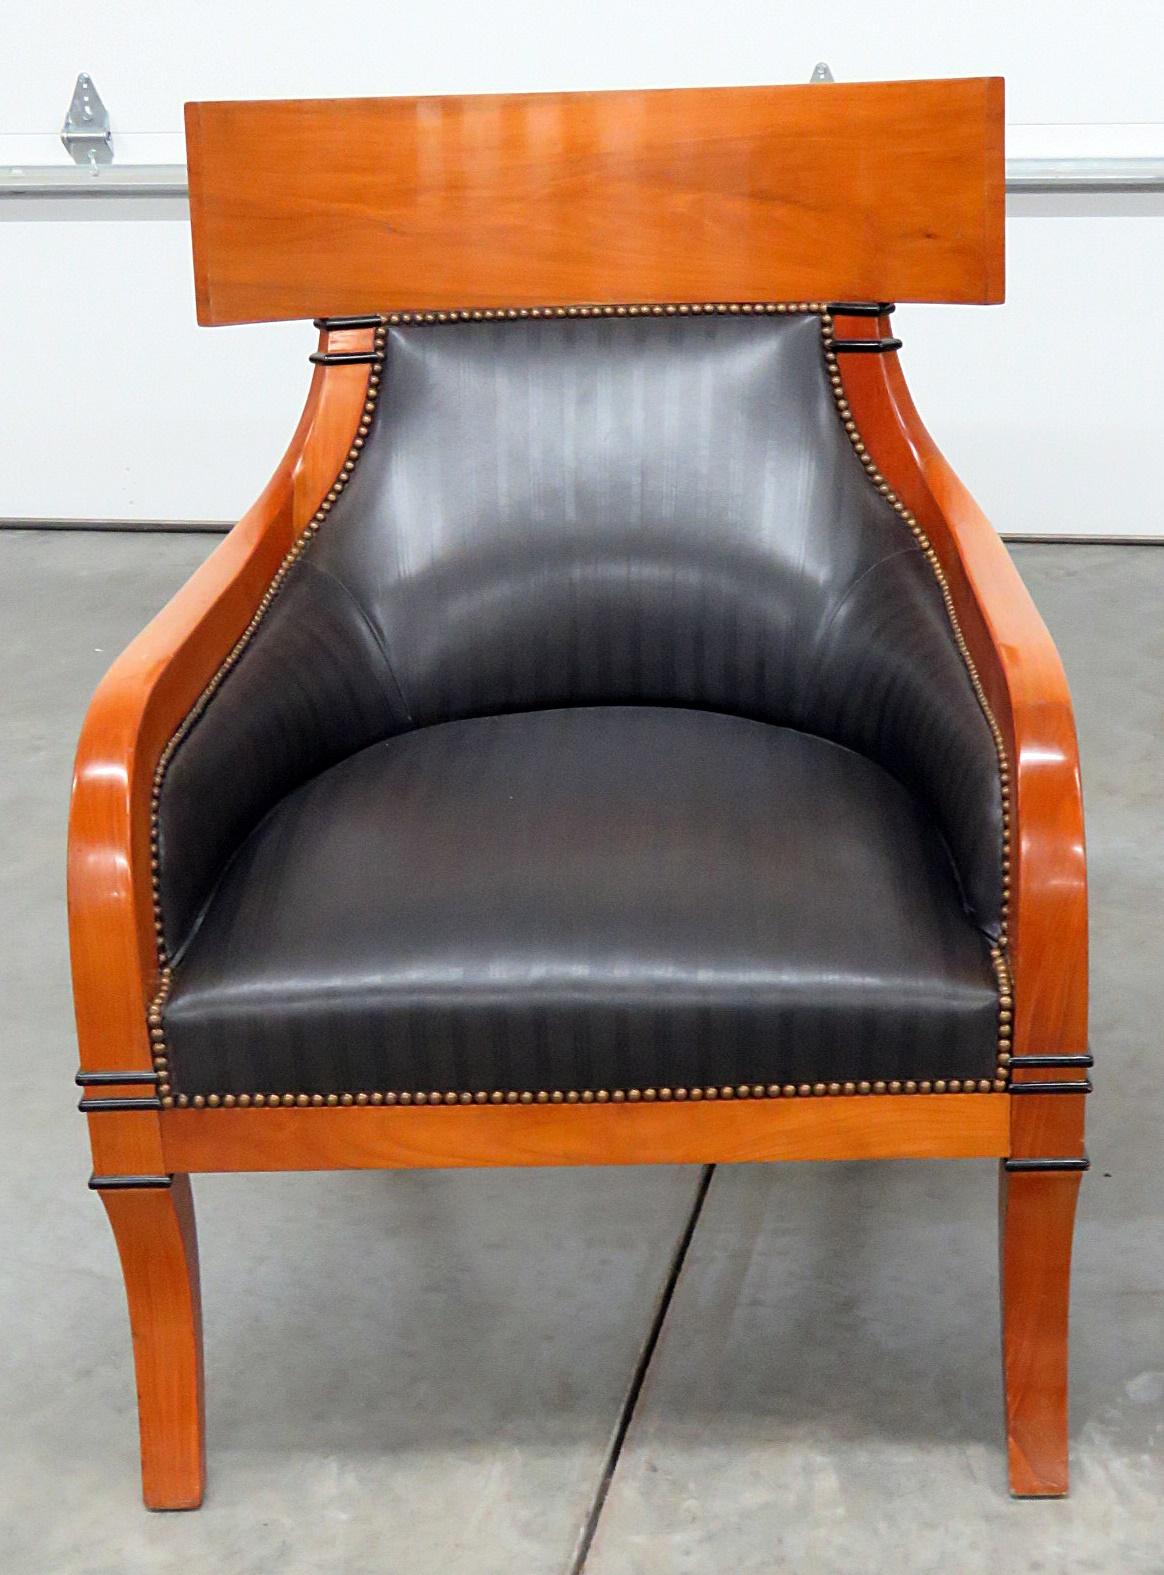 Pair of Biedermeier style leather upholstered club chairs with nailhead trim and ebonized accents.